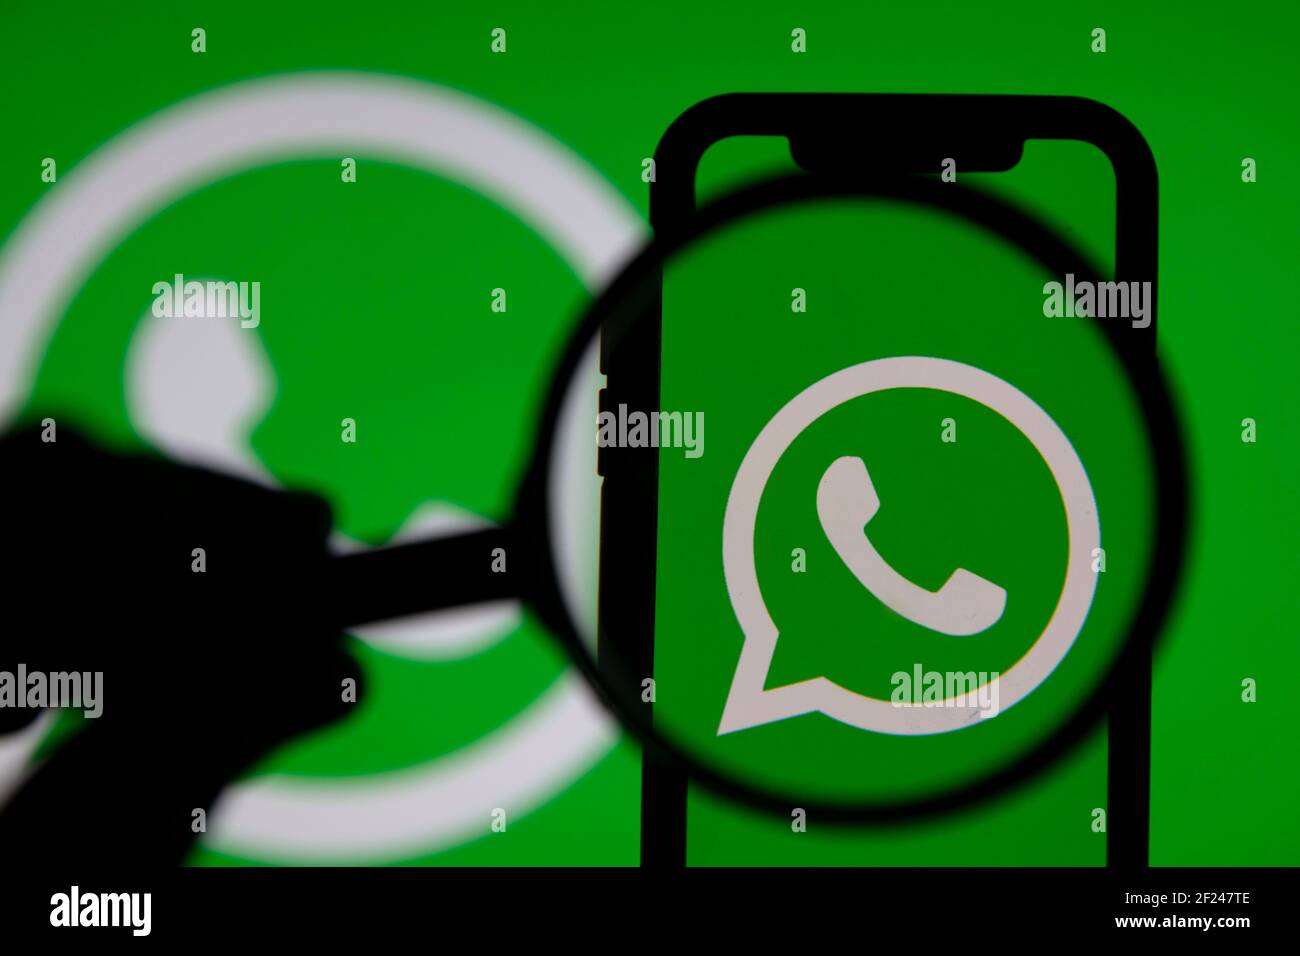 LONDON, UK - March 2021: Whatsapp online messaging service logo on a smartphone Stock Photo